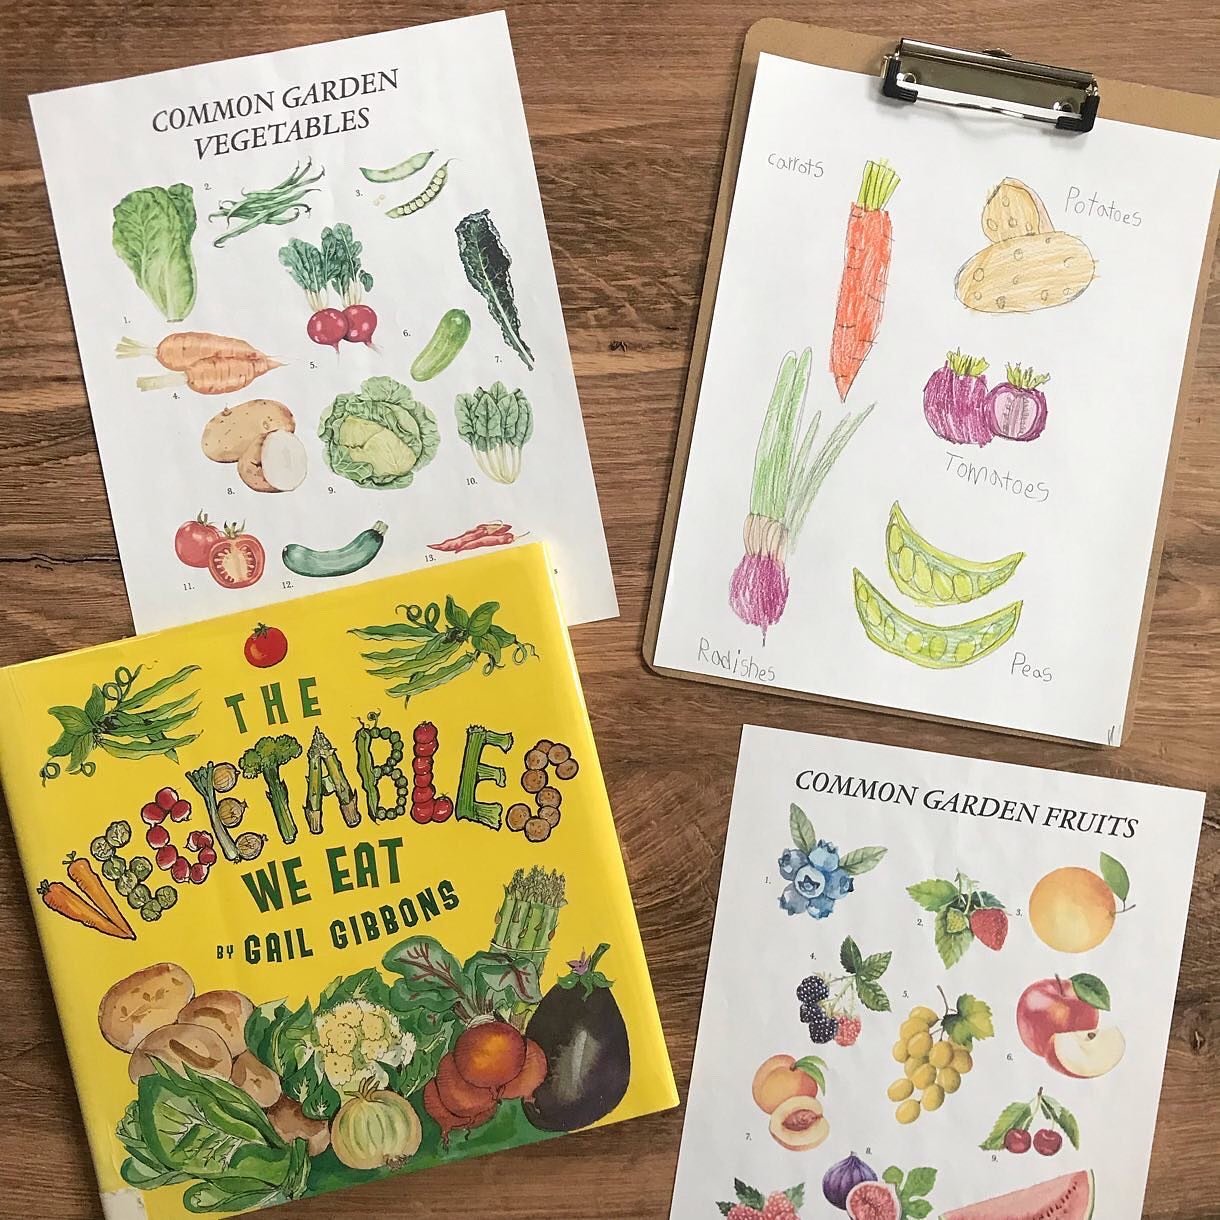 Homeschool Recap: The theme for our nature study this week was edible gardening so we reviewed the many common fruits and vegetables there are and focused a bit more on veggies. We read about the different groups (root, stem, tuber, seed, etc..), as 